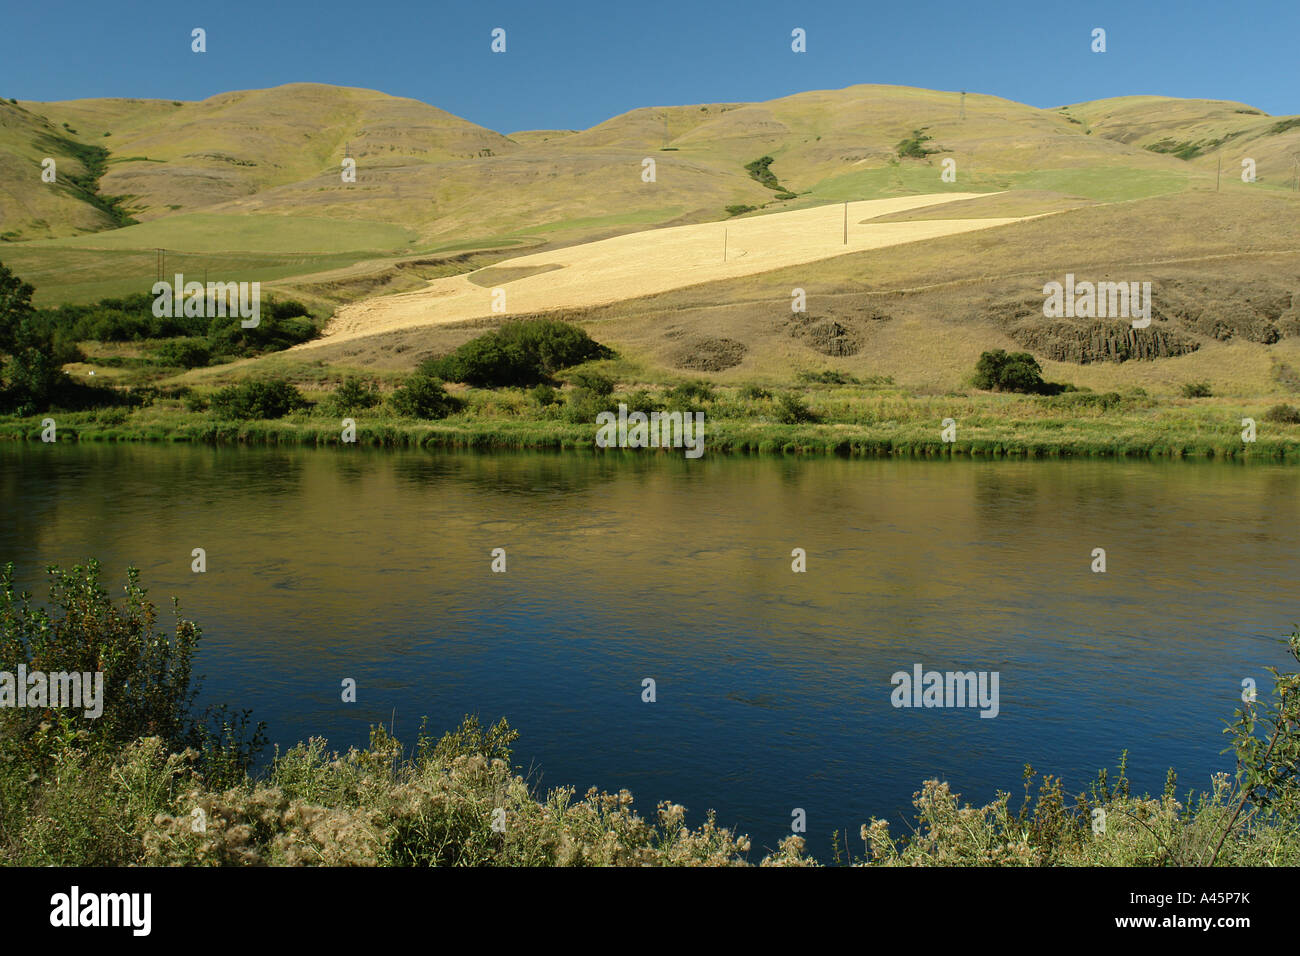 AJD56137, ID, Idaho, Clearwater River, Nez Perce Indian Reservation, Northwest Passage National Scenic Byway Stock Photo